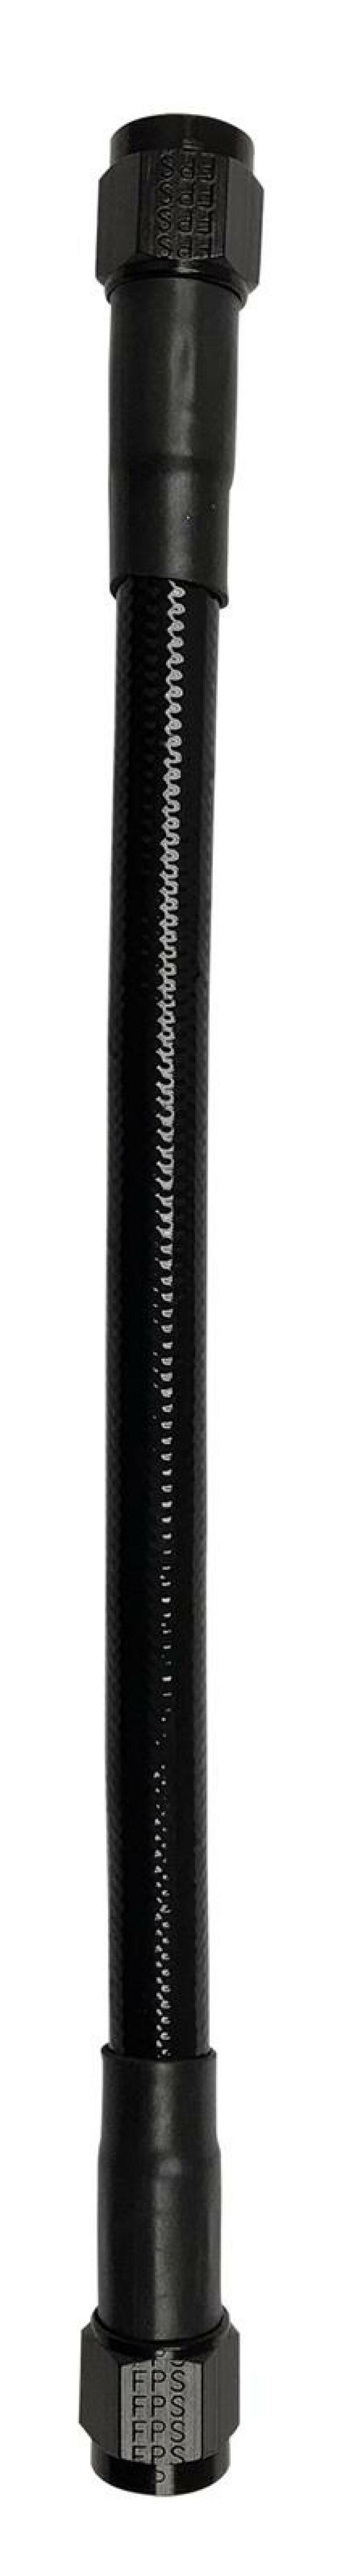 Fragola -6AN Ext Black PTFE Hose Assembly Straight x Straight 84in - 6026-1-1-84BL